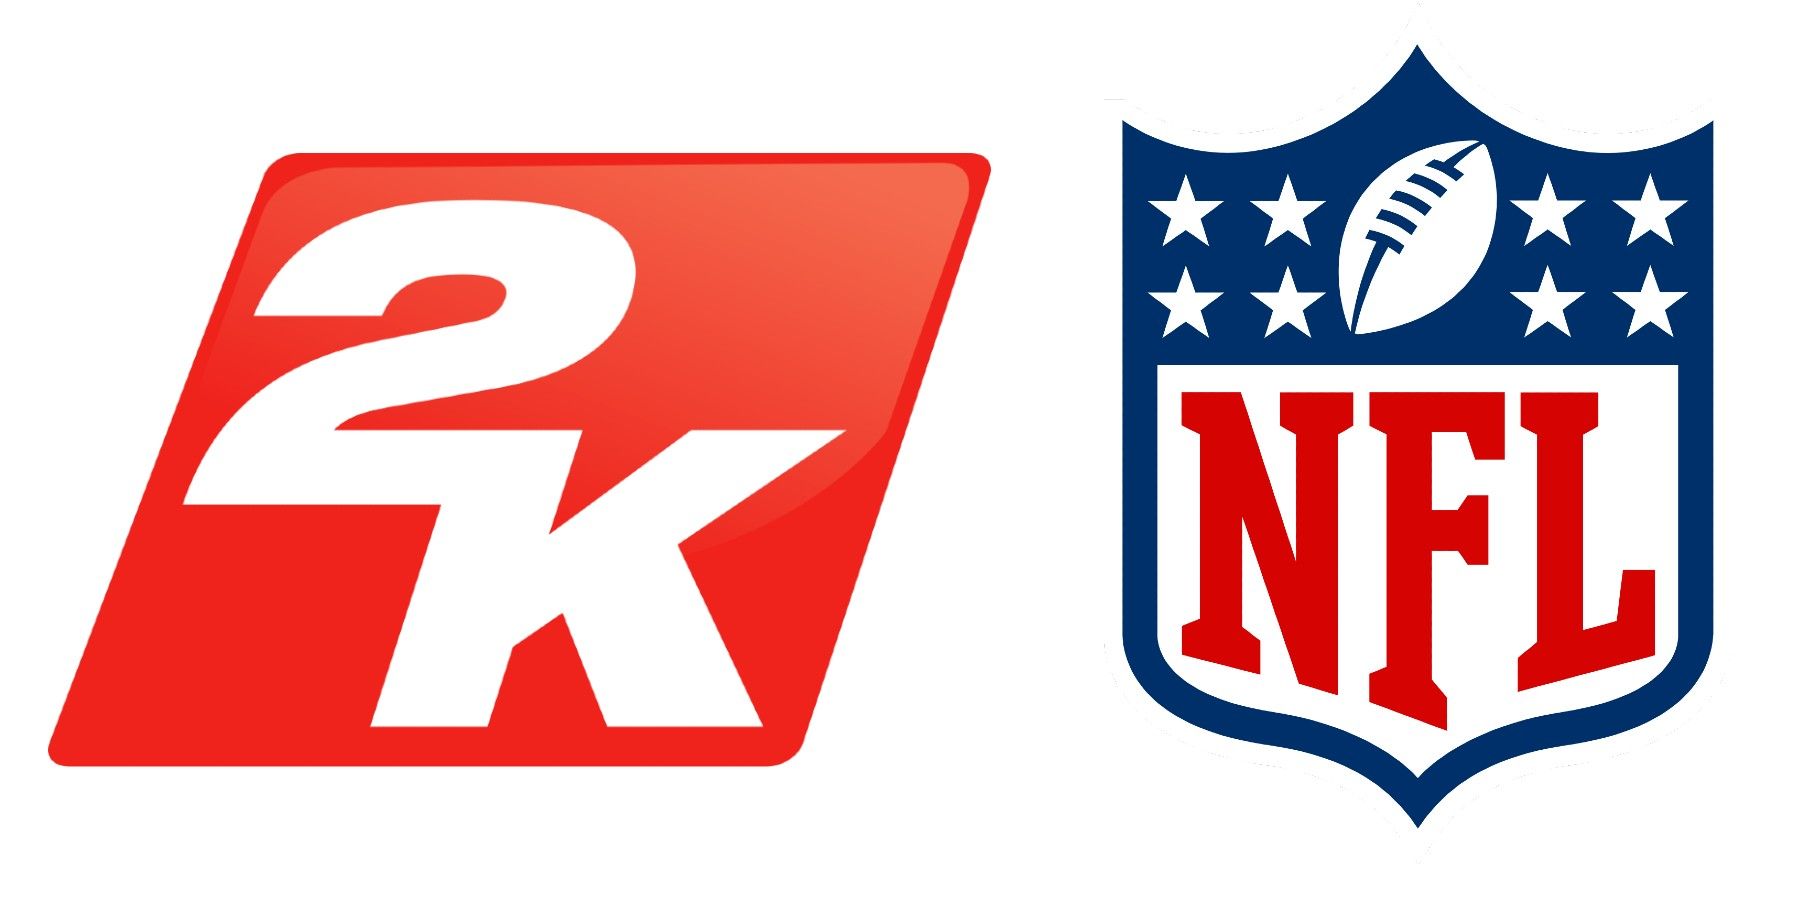 2K Delays First Game In New Non-Simulation NFL Series